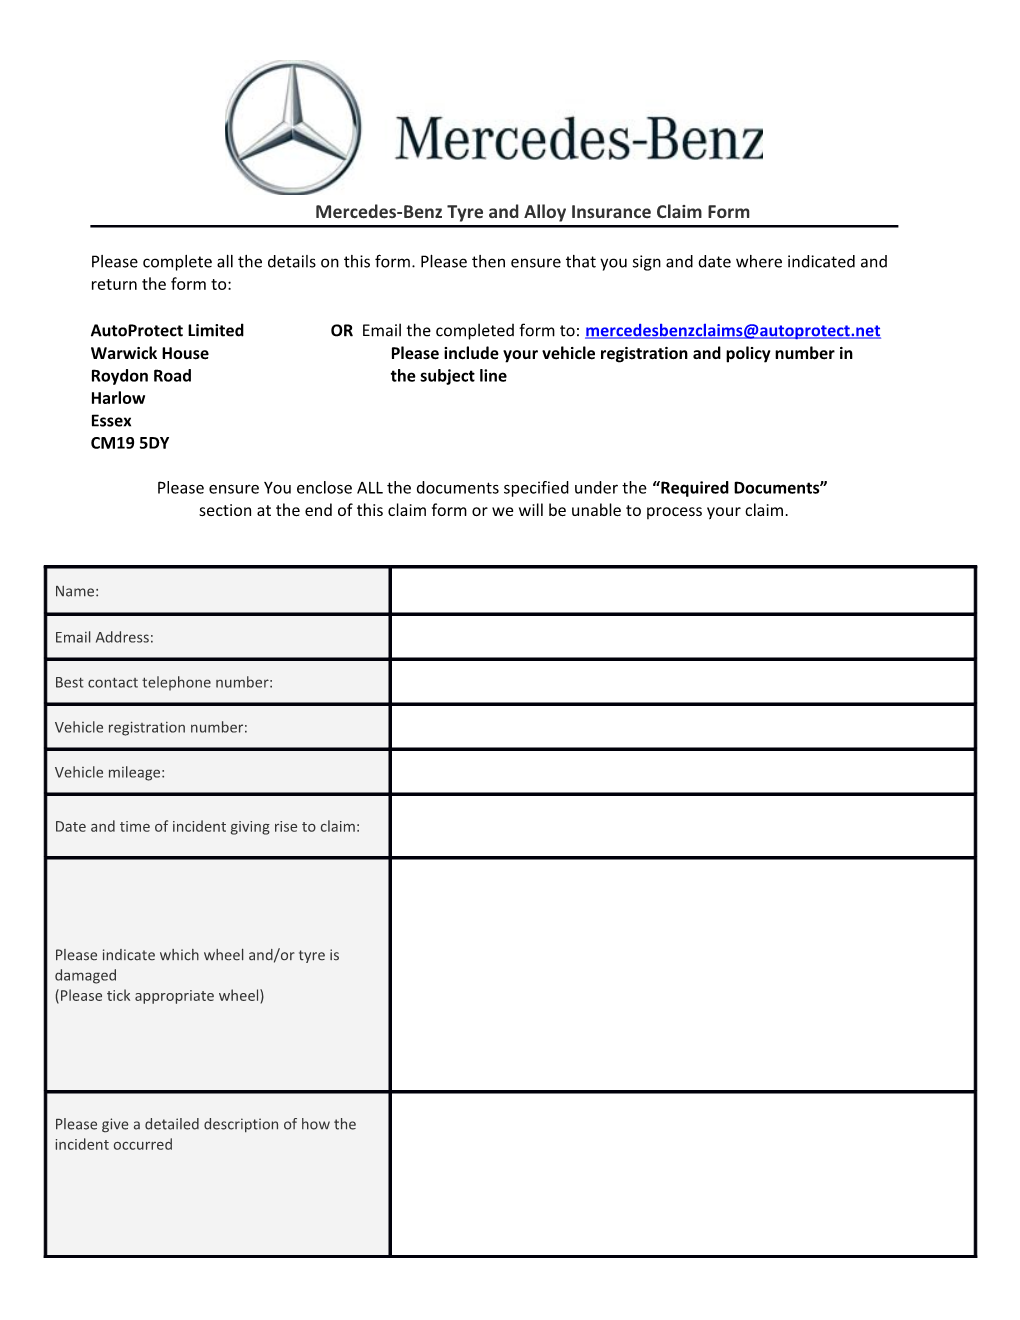 Mercedes-Benz Tyre and Alloy Insuranceclaim Form